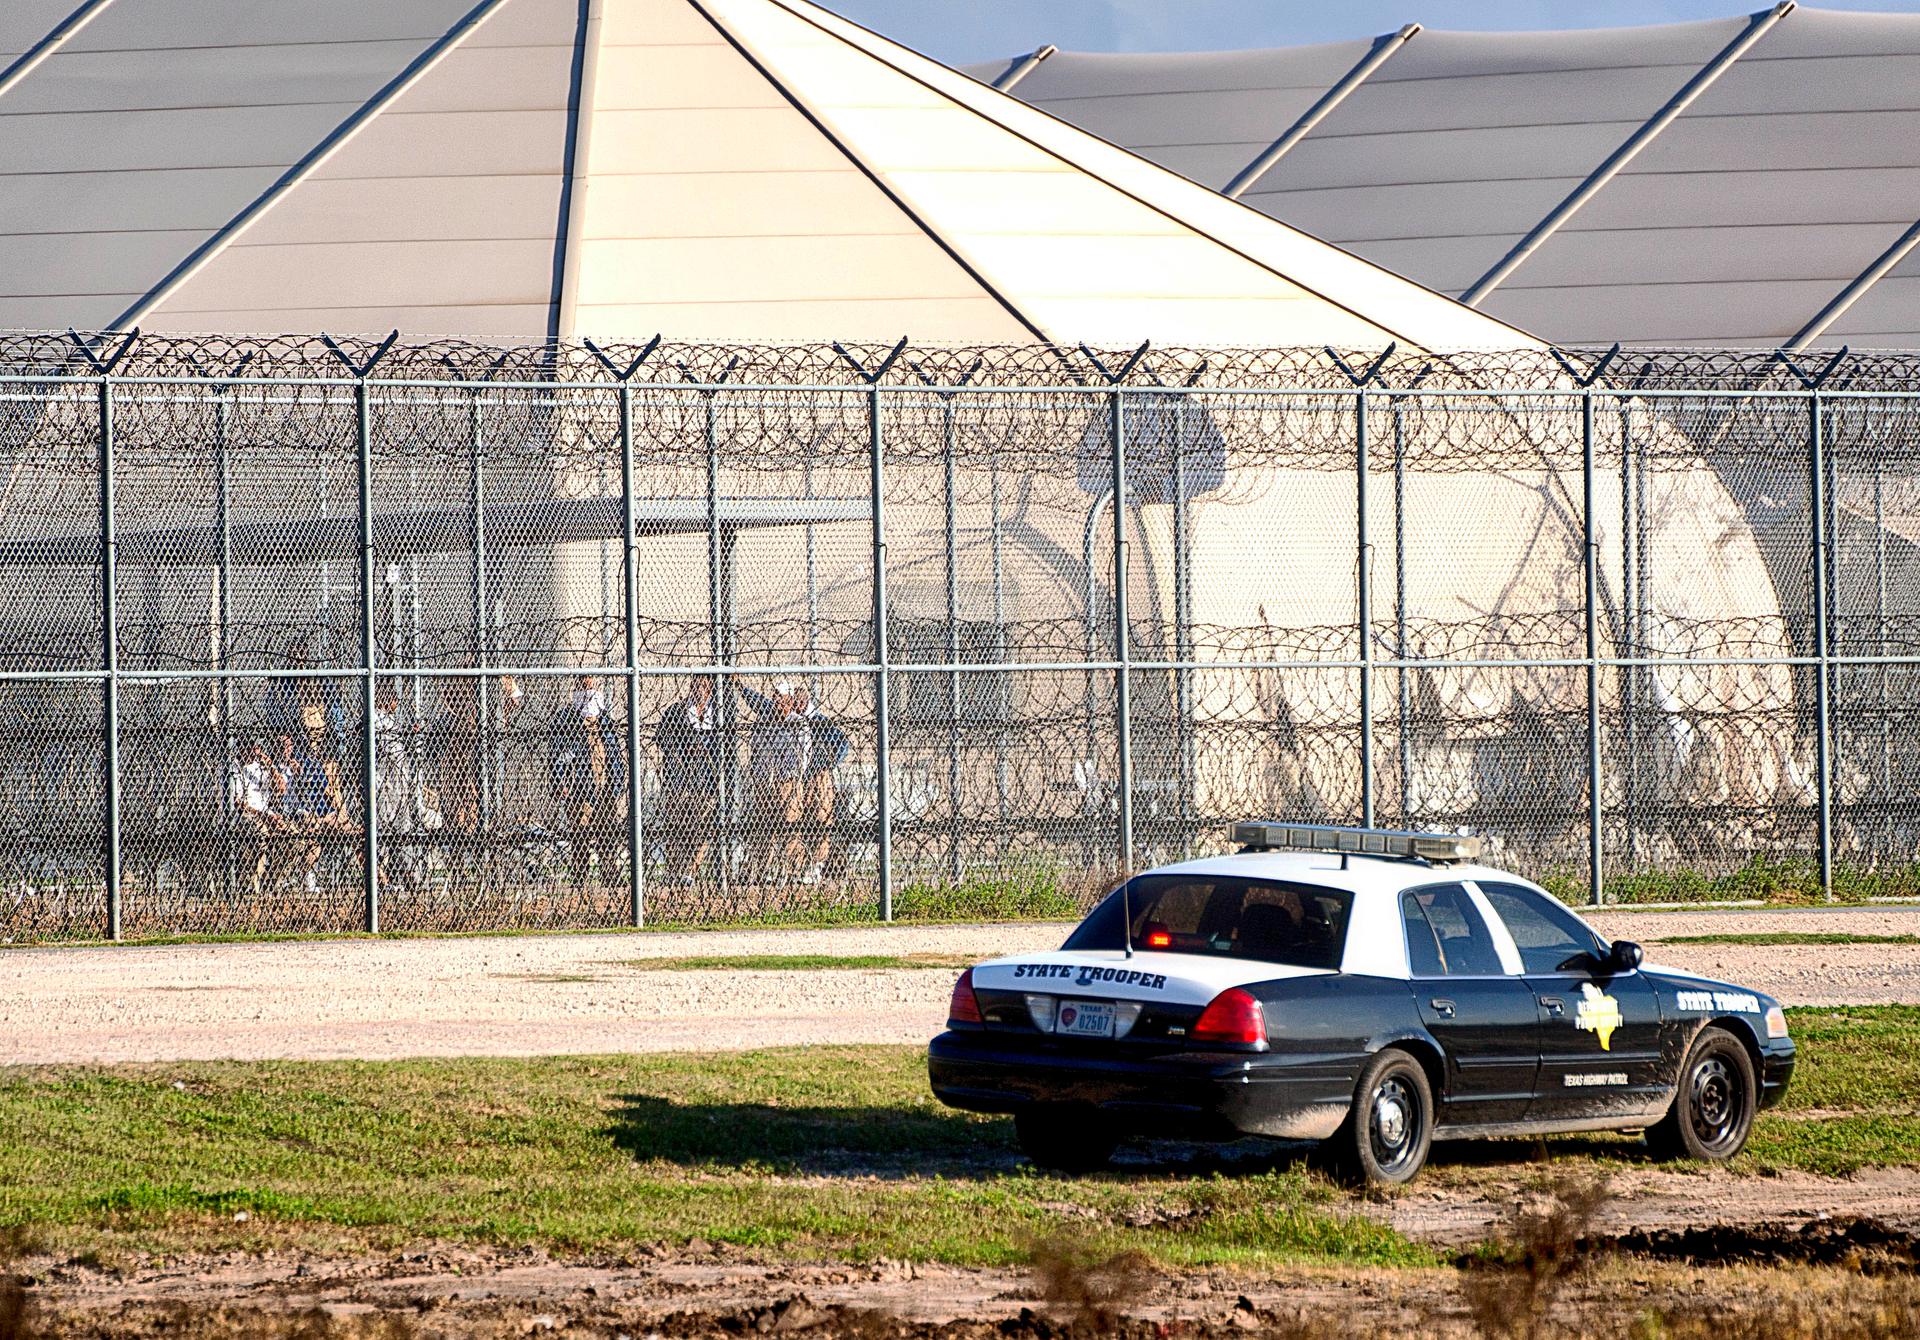 police cars in front barbed wire, where prisoners look out